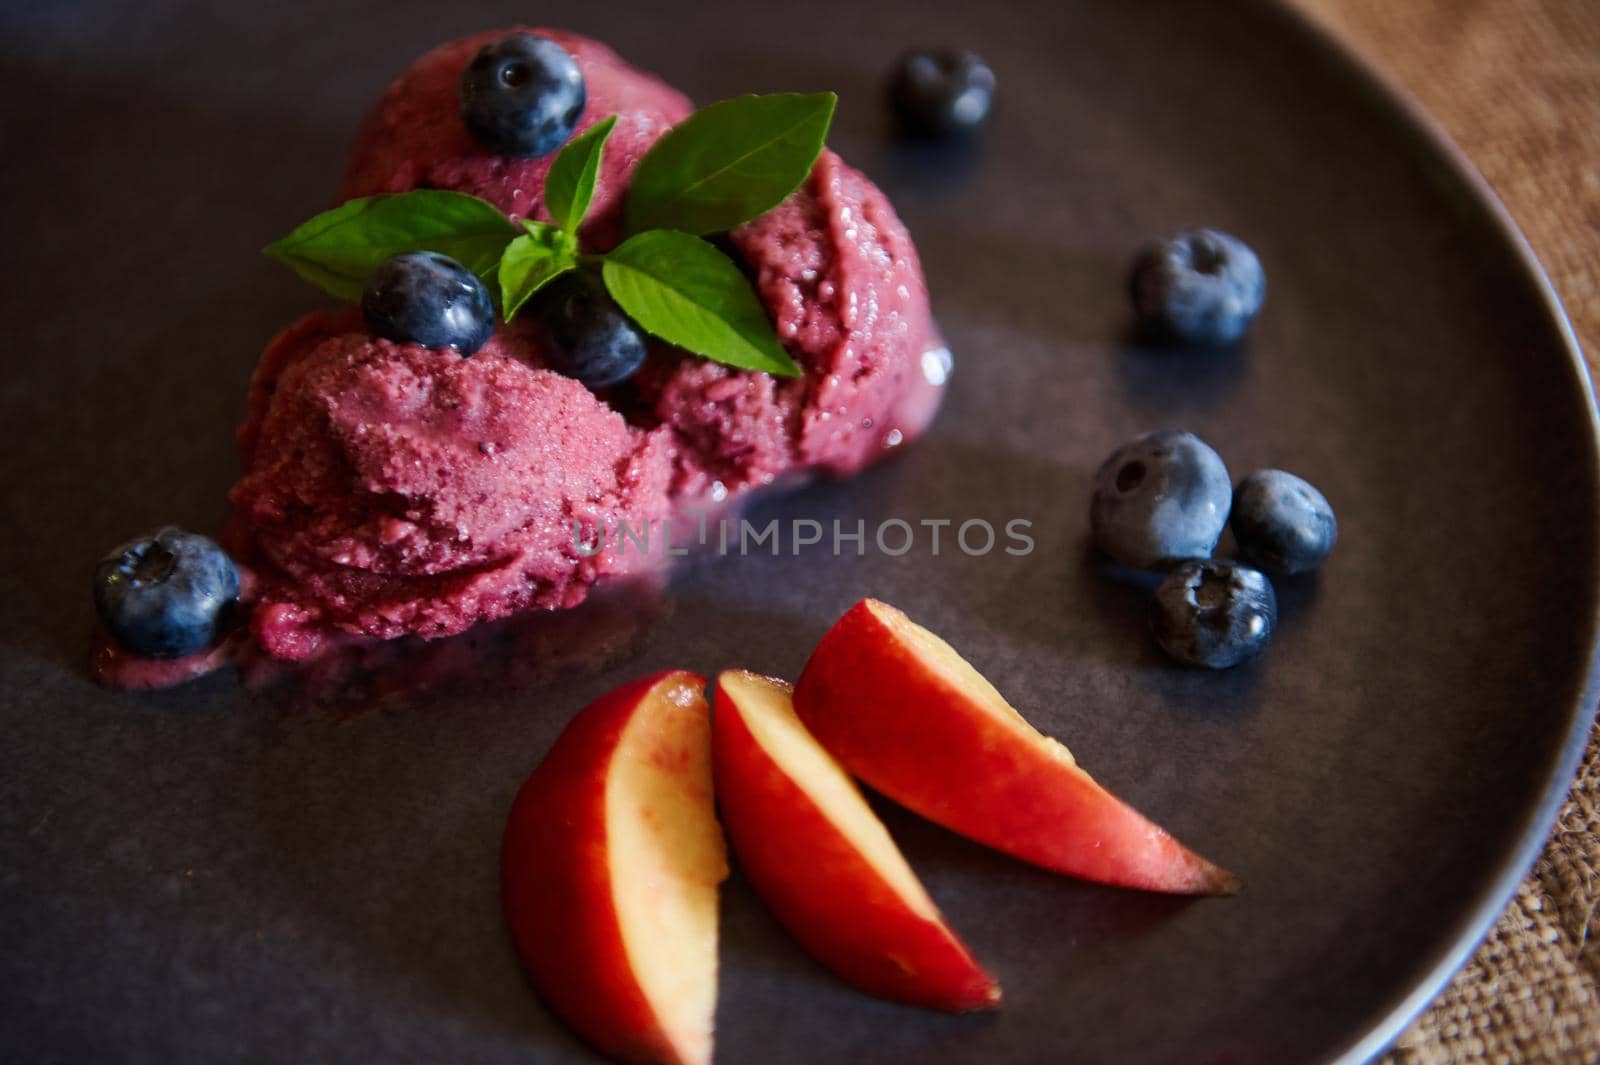 Still life of a healthy, sweet, raw vegan dessert. Homemade blueberry sorbet, ice cream with slices of ripe juicy peach and lemon basil leaves on a navy color ceramic plate. Food and drink consumerism